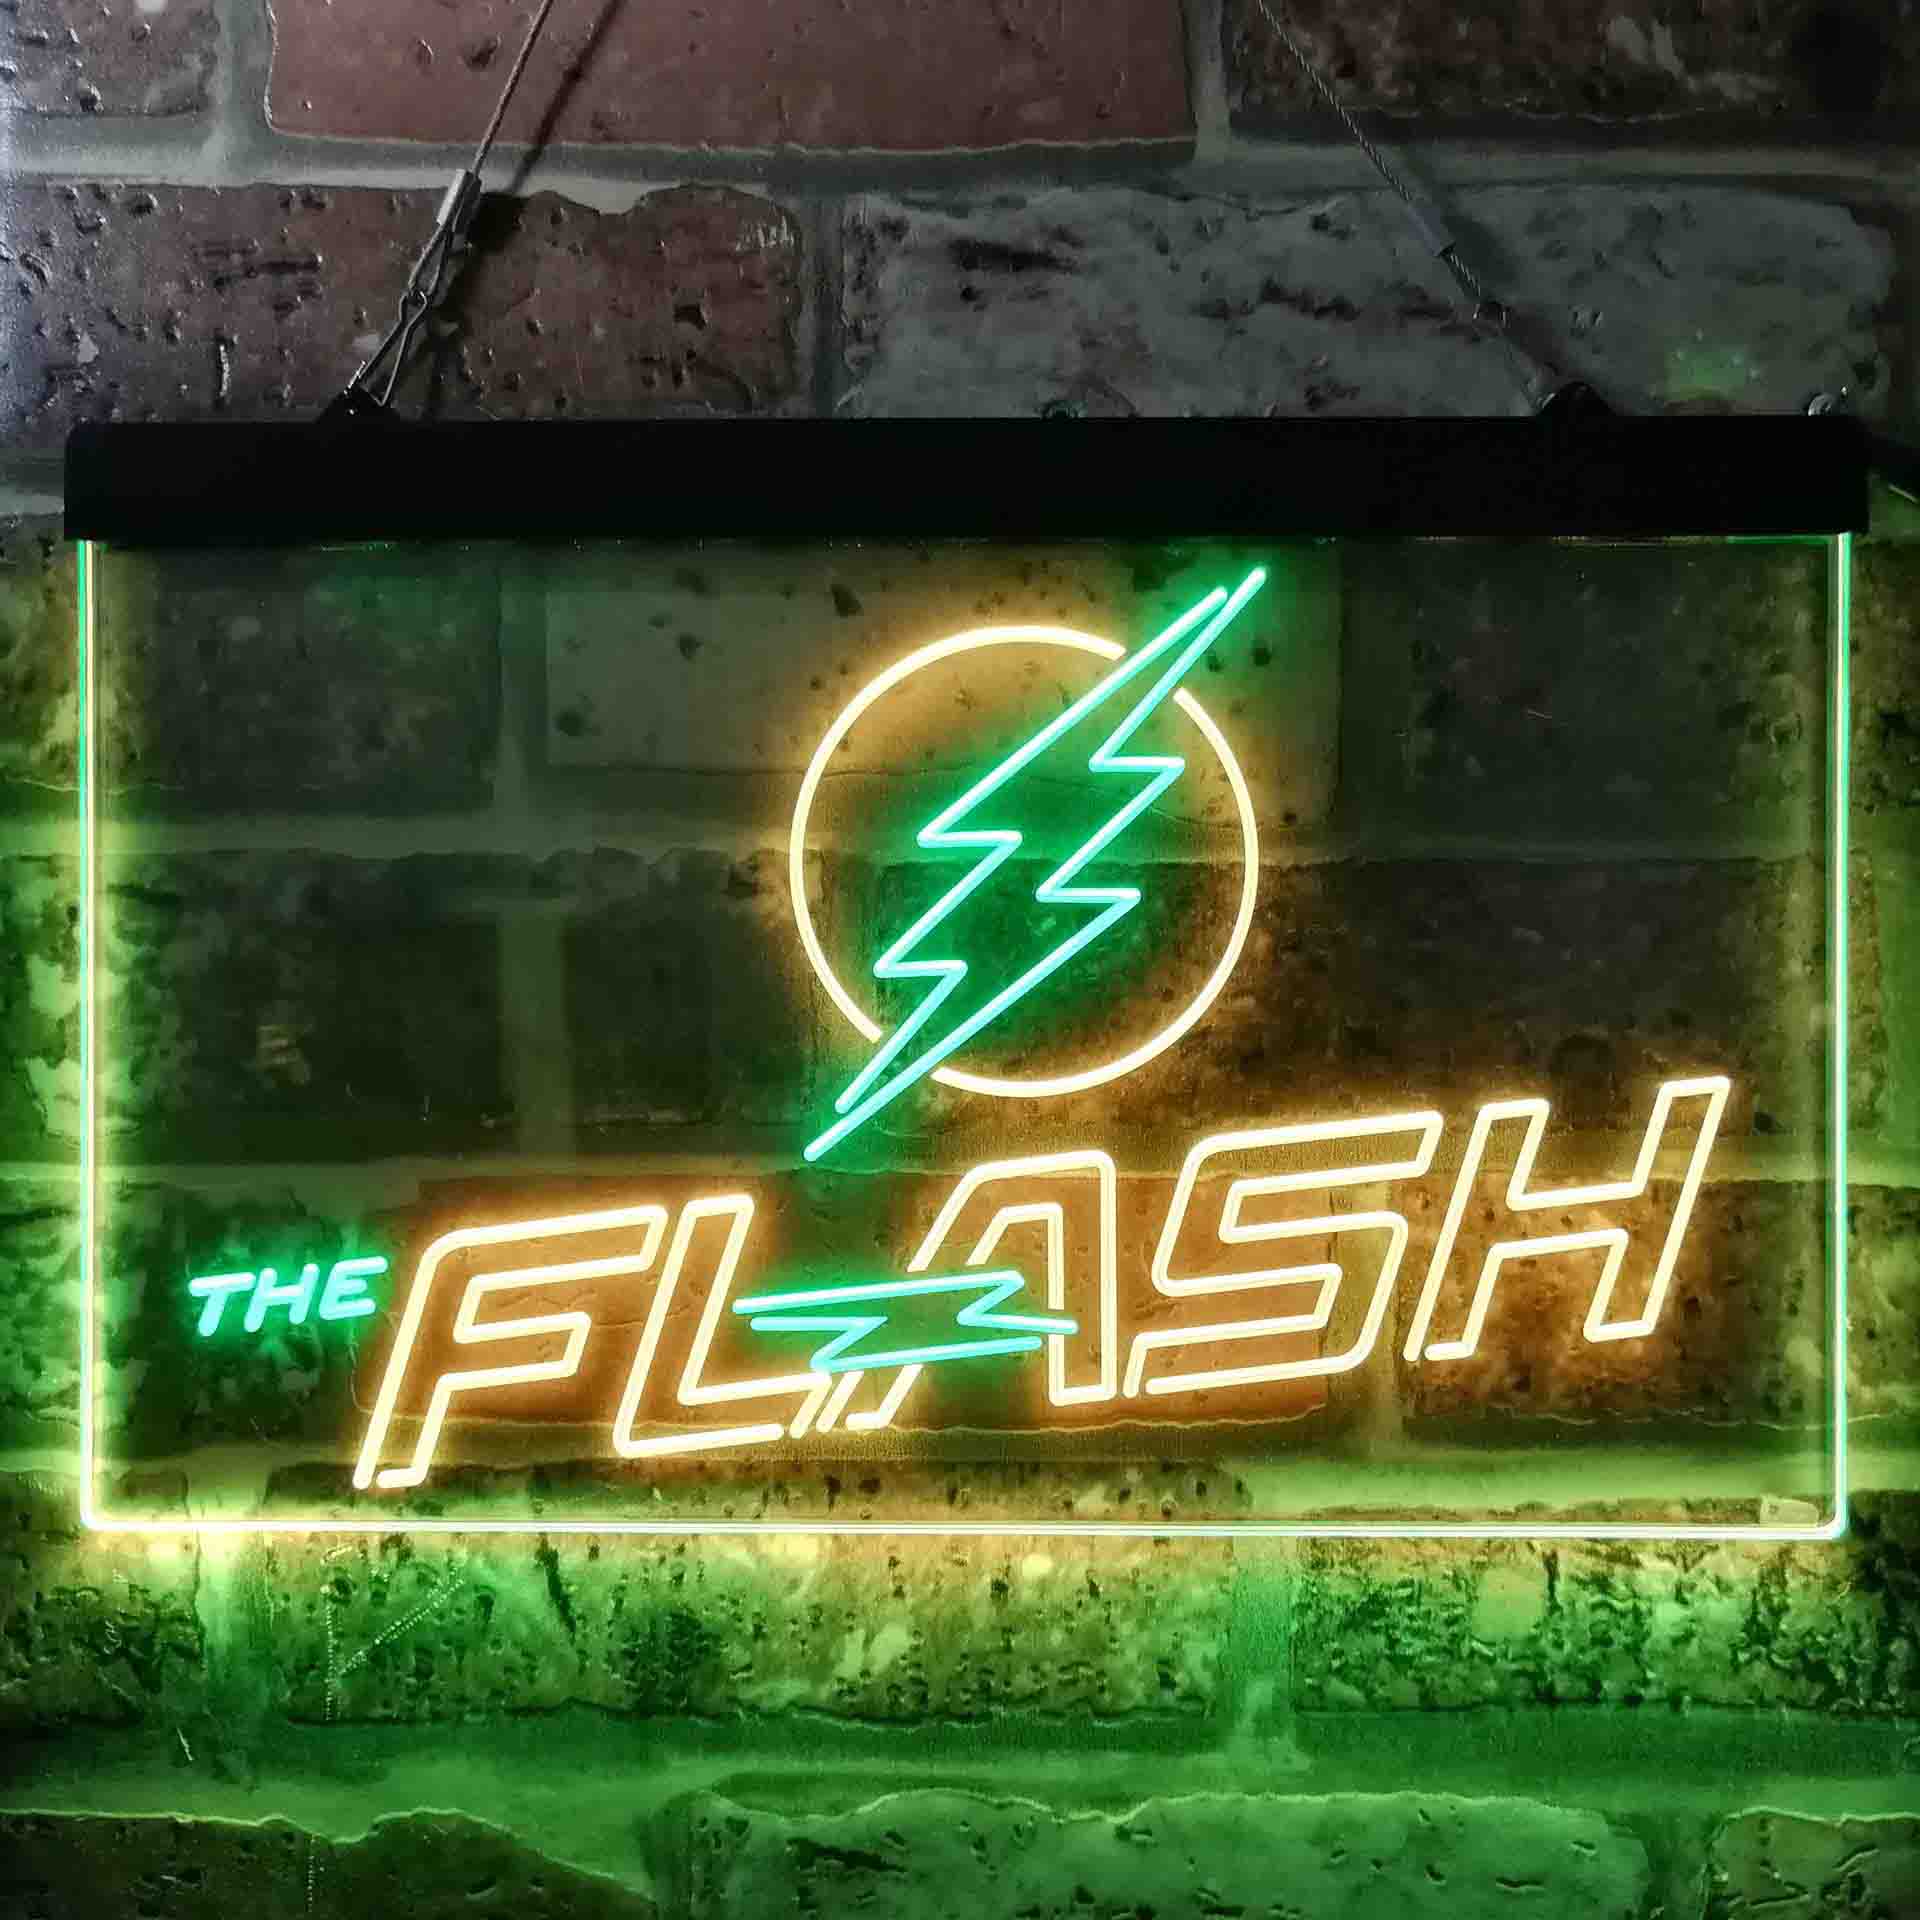 The Flash Neon-Like LED Sign